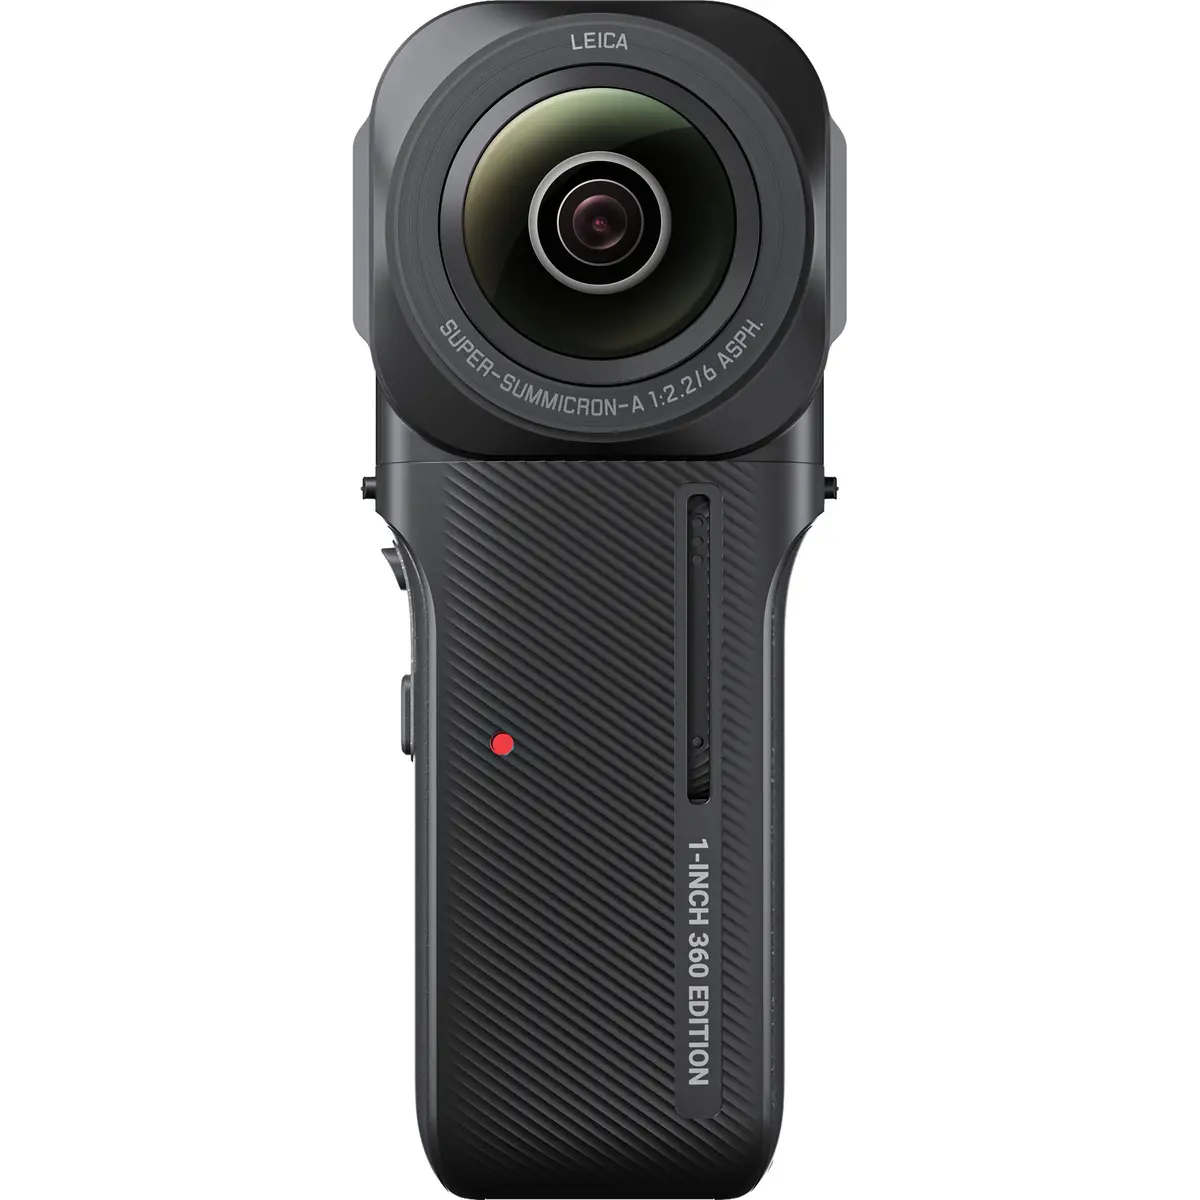 2. Insta360 One RS Camera (1-inch Leica 360 Edition)